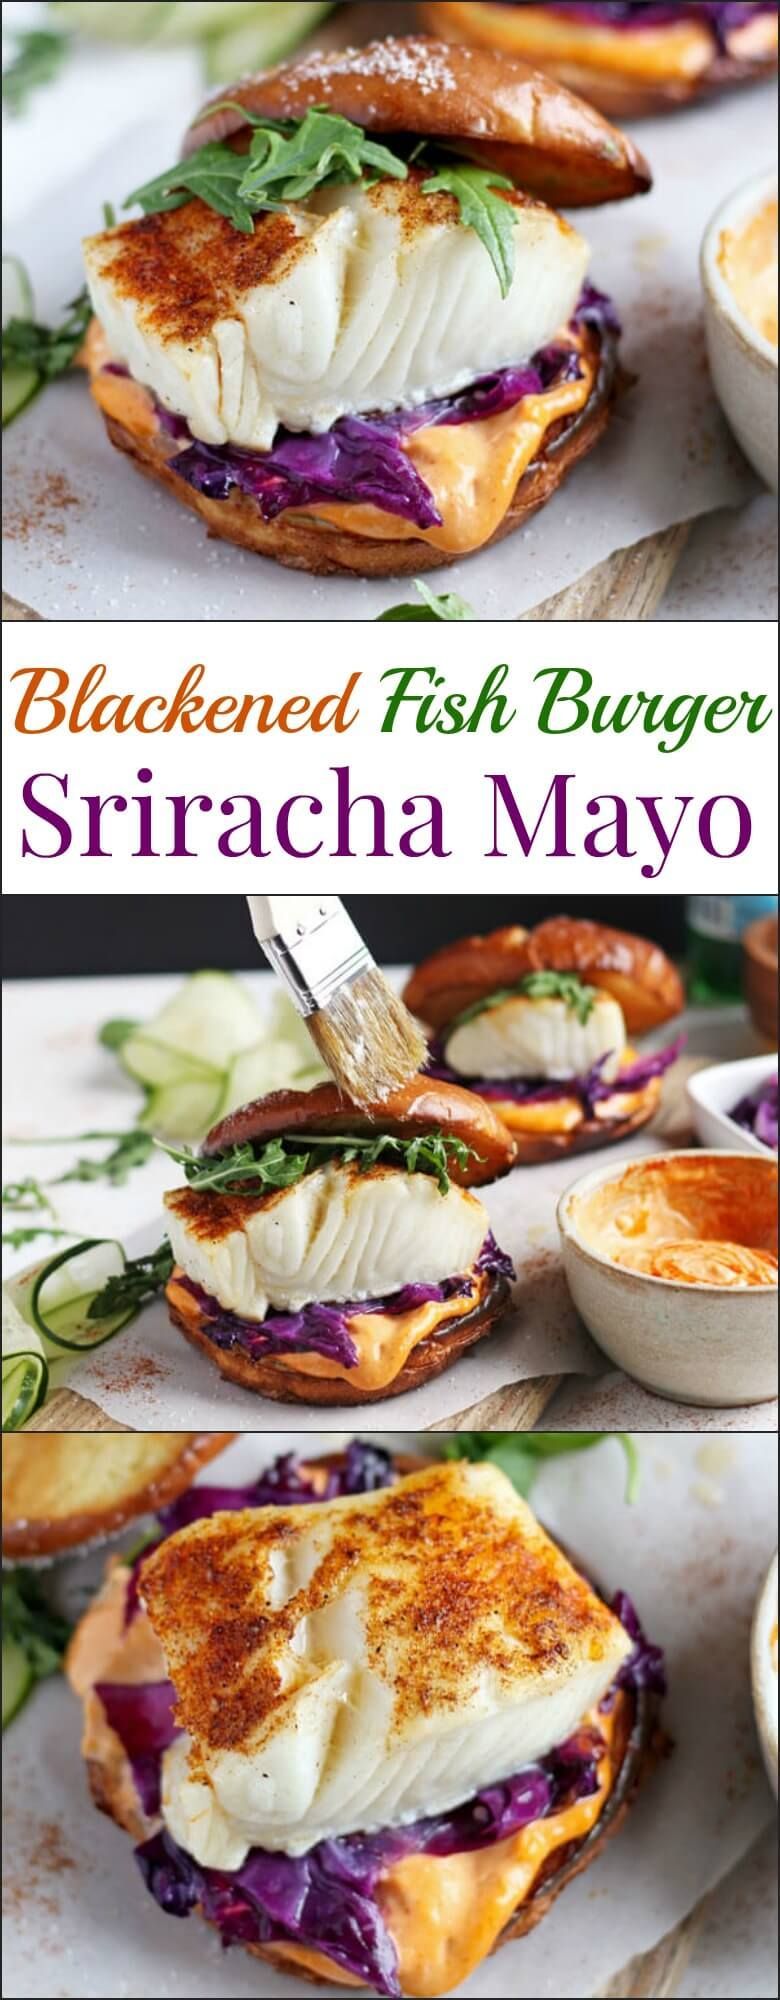 This blackened fish burger + sriracha mayo is a quick and easy weeknight meal that is healthy and bursting with flavor!  Ready and on your table in 30 minutes! -   22 summer fish recipes
 ideas